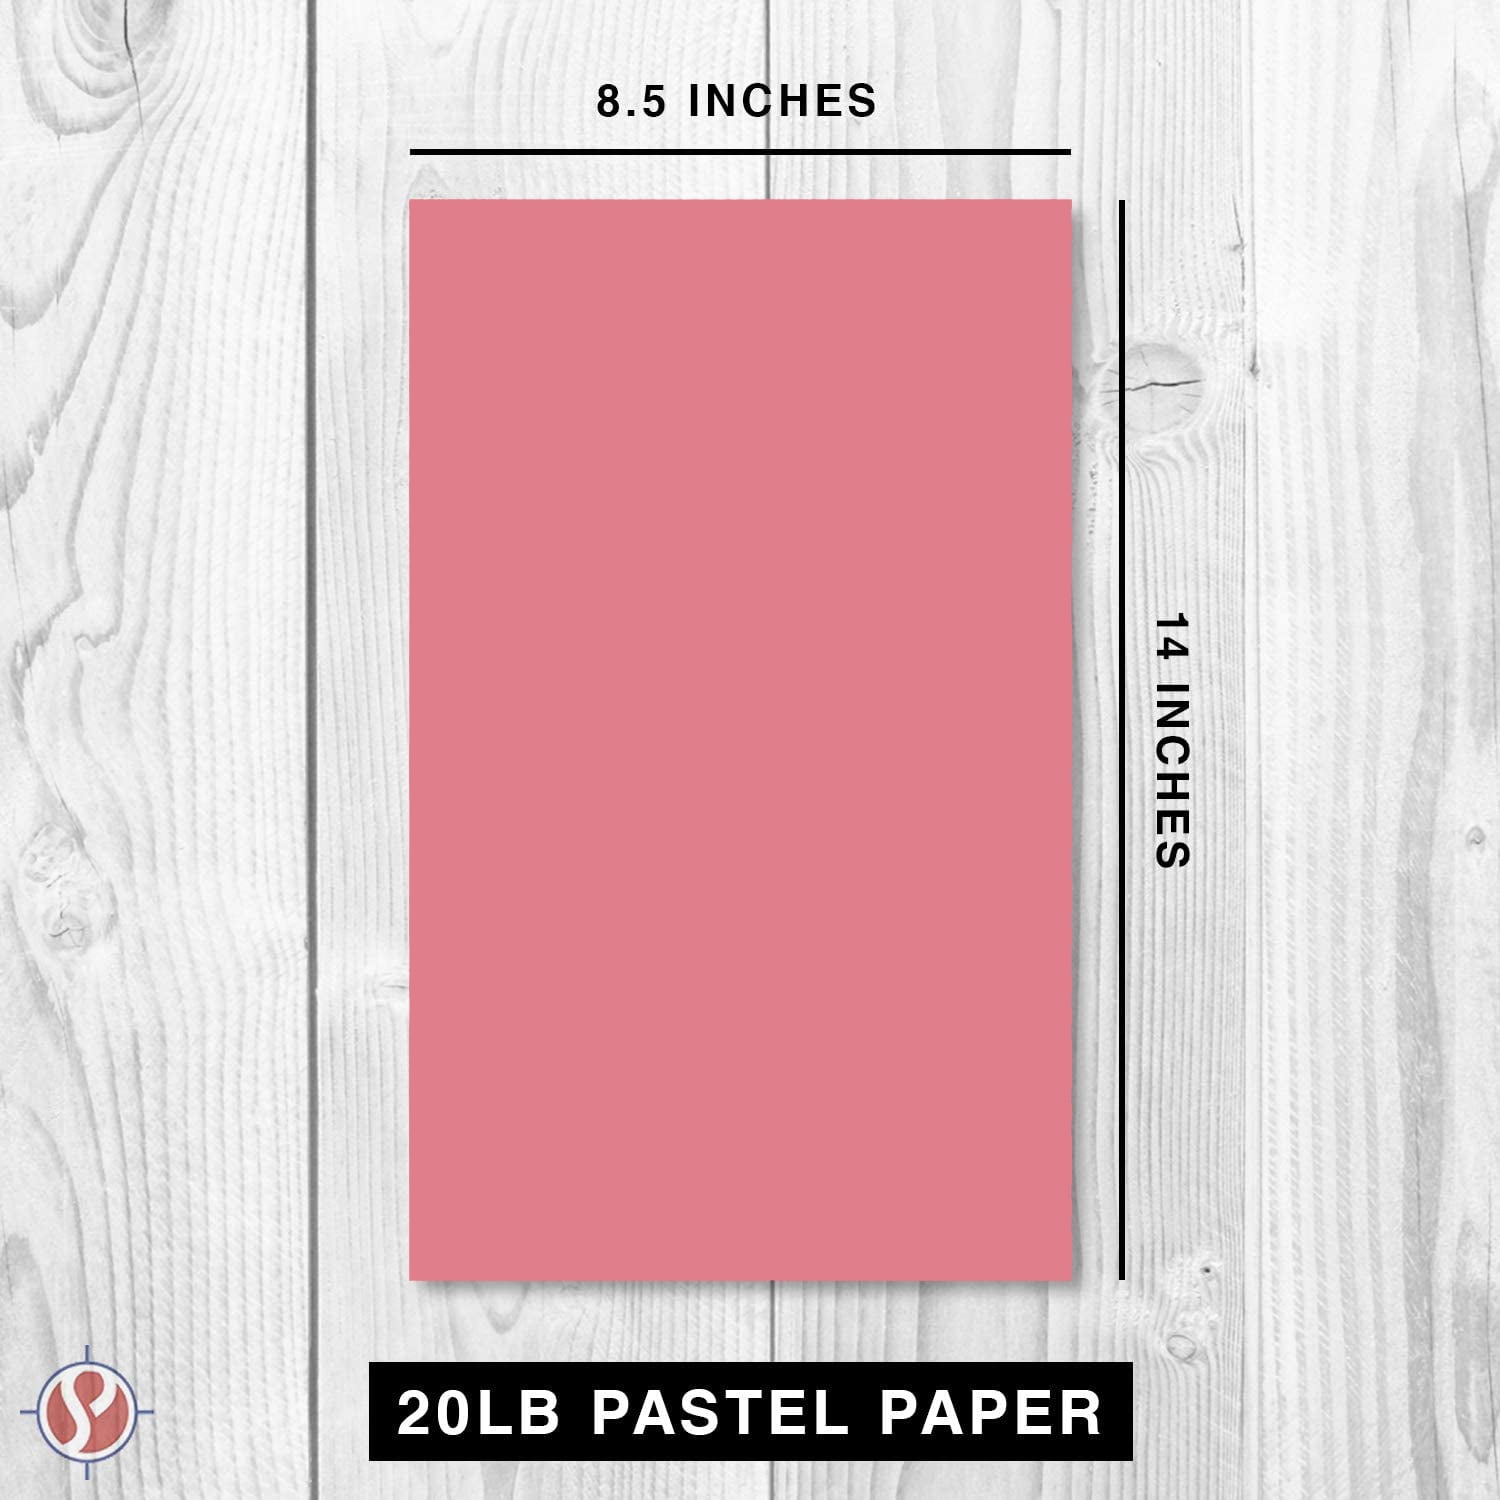 Pink Ice 8.5 x 14 Menu Size Stationery Parchment Colored Regular Papers, Color Paper | 1 Ream of 100 Sheets